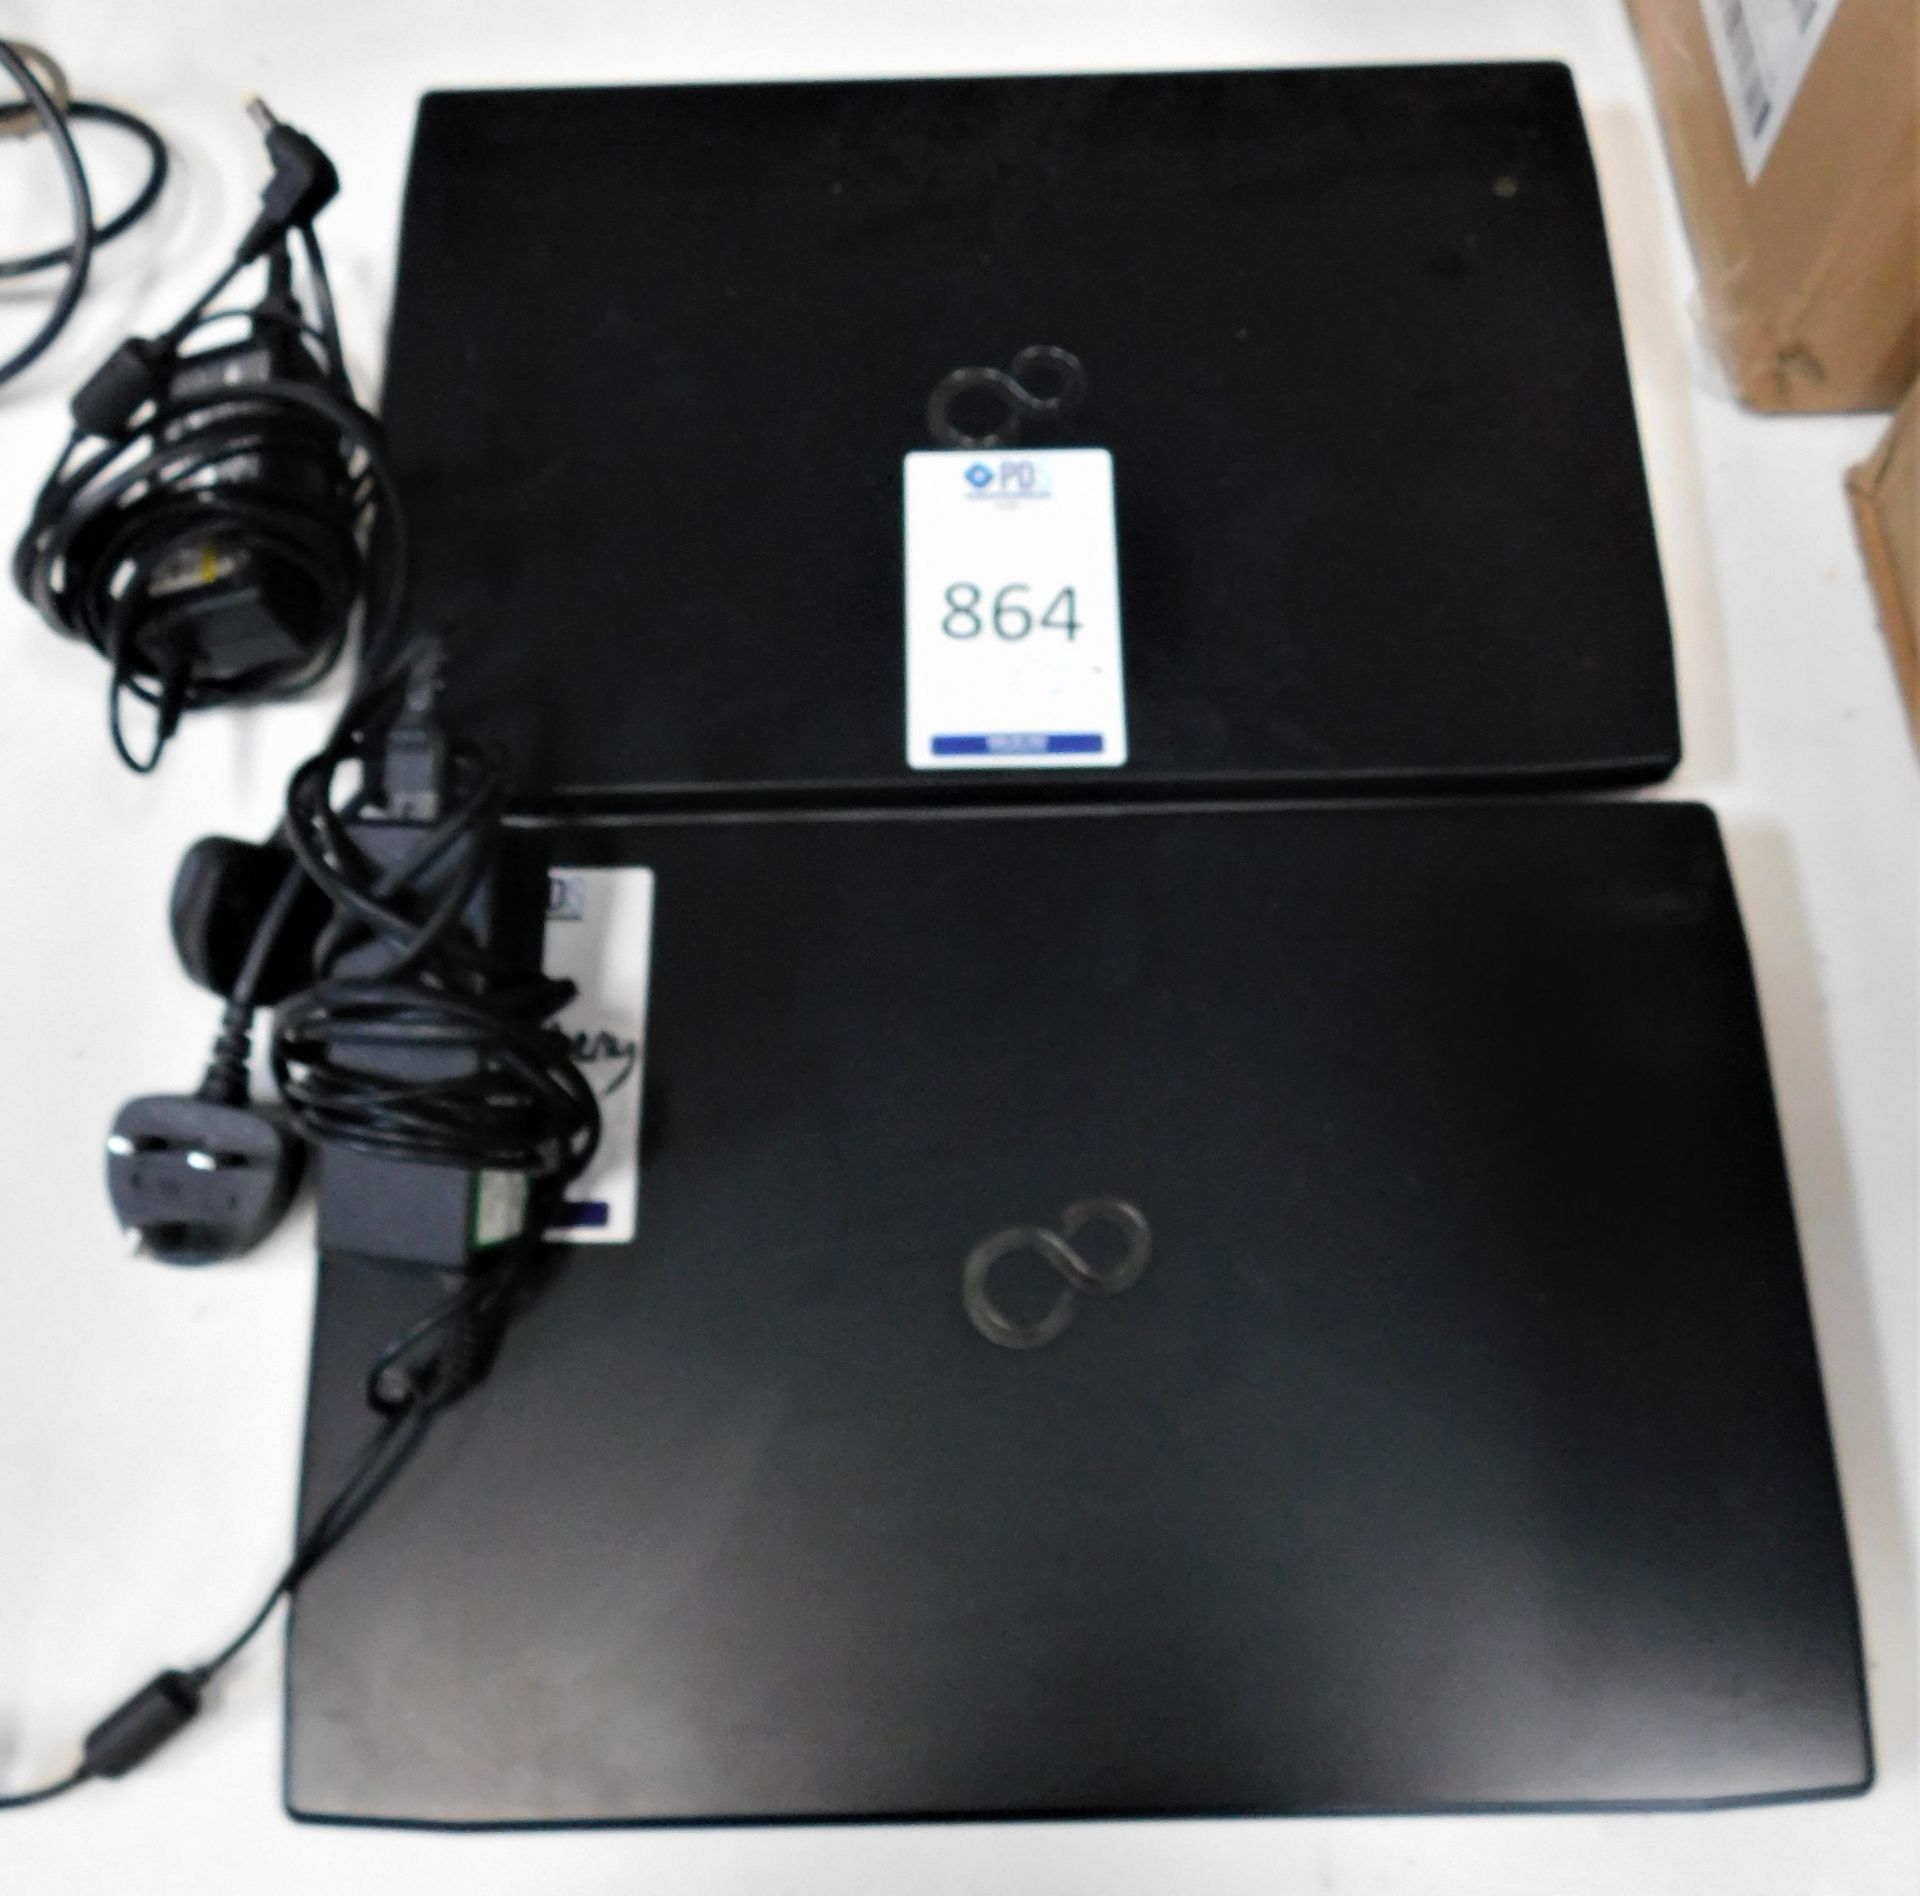 2 Fujitsu Intel Core i3 Laptops, with AC Adapters (No HDDs) (Location Brentwood. Please Refer to